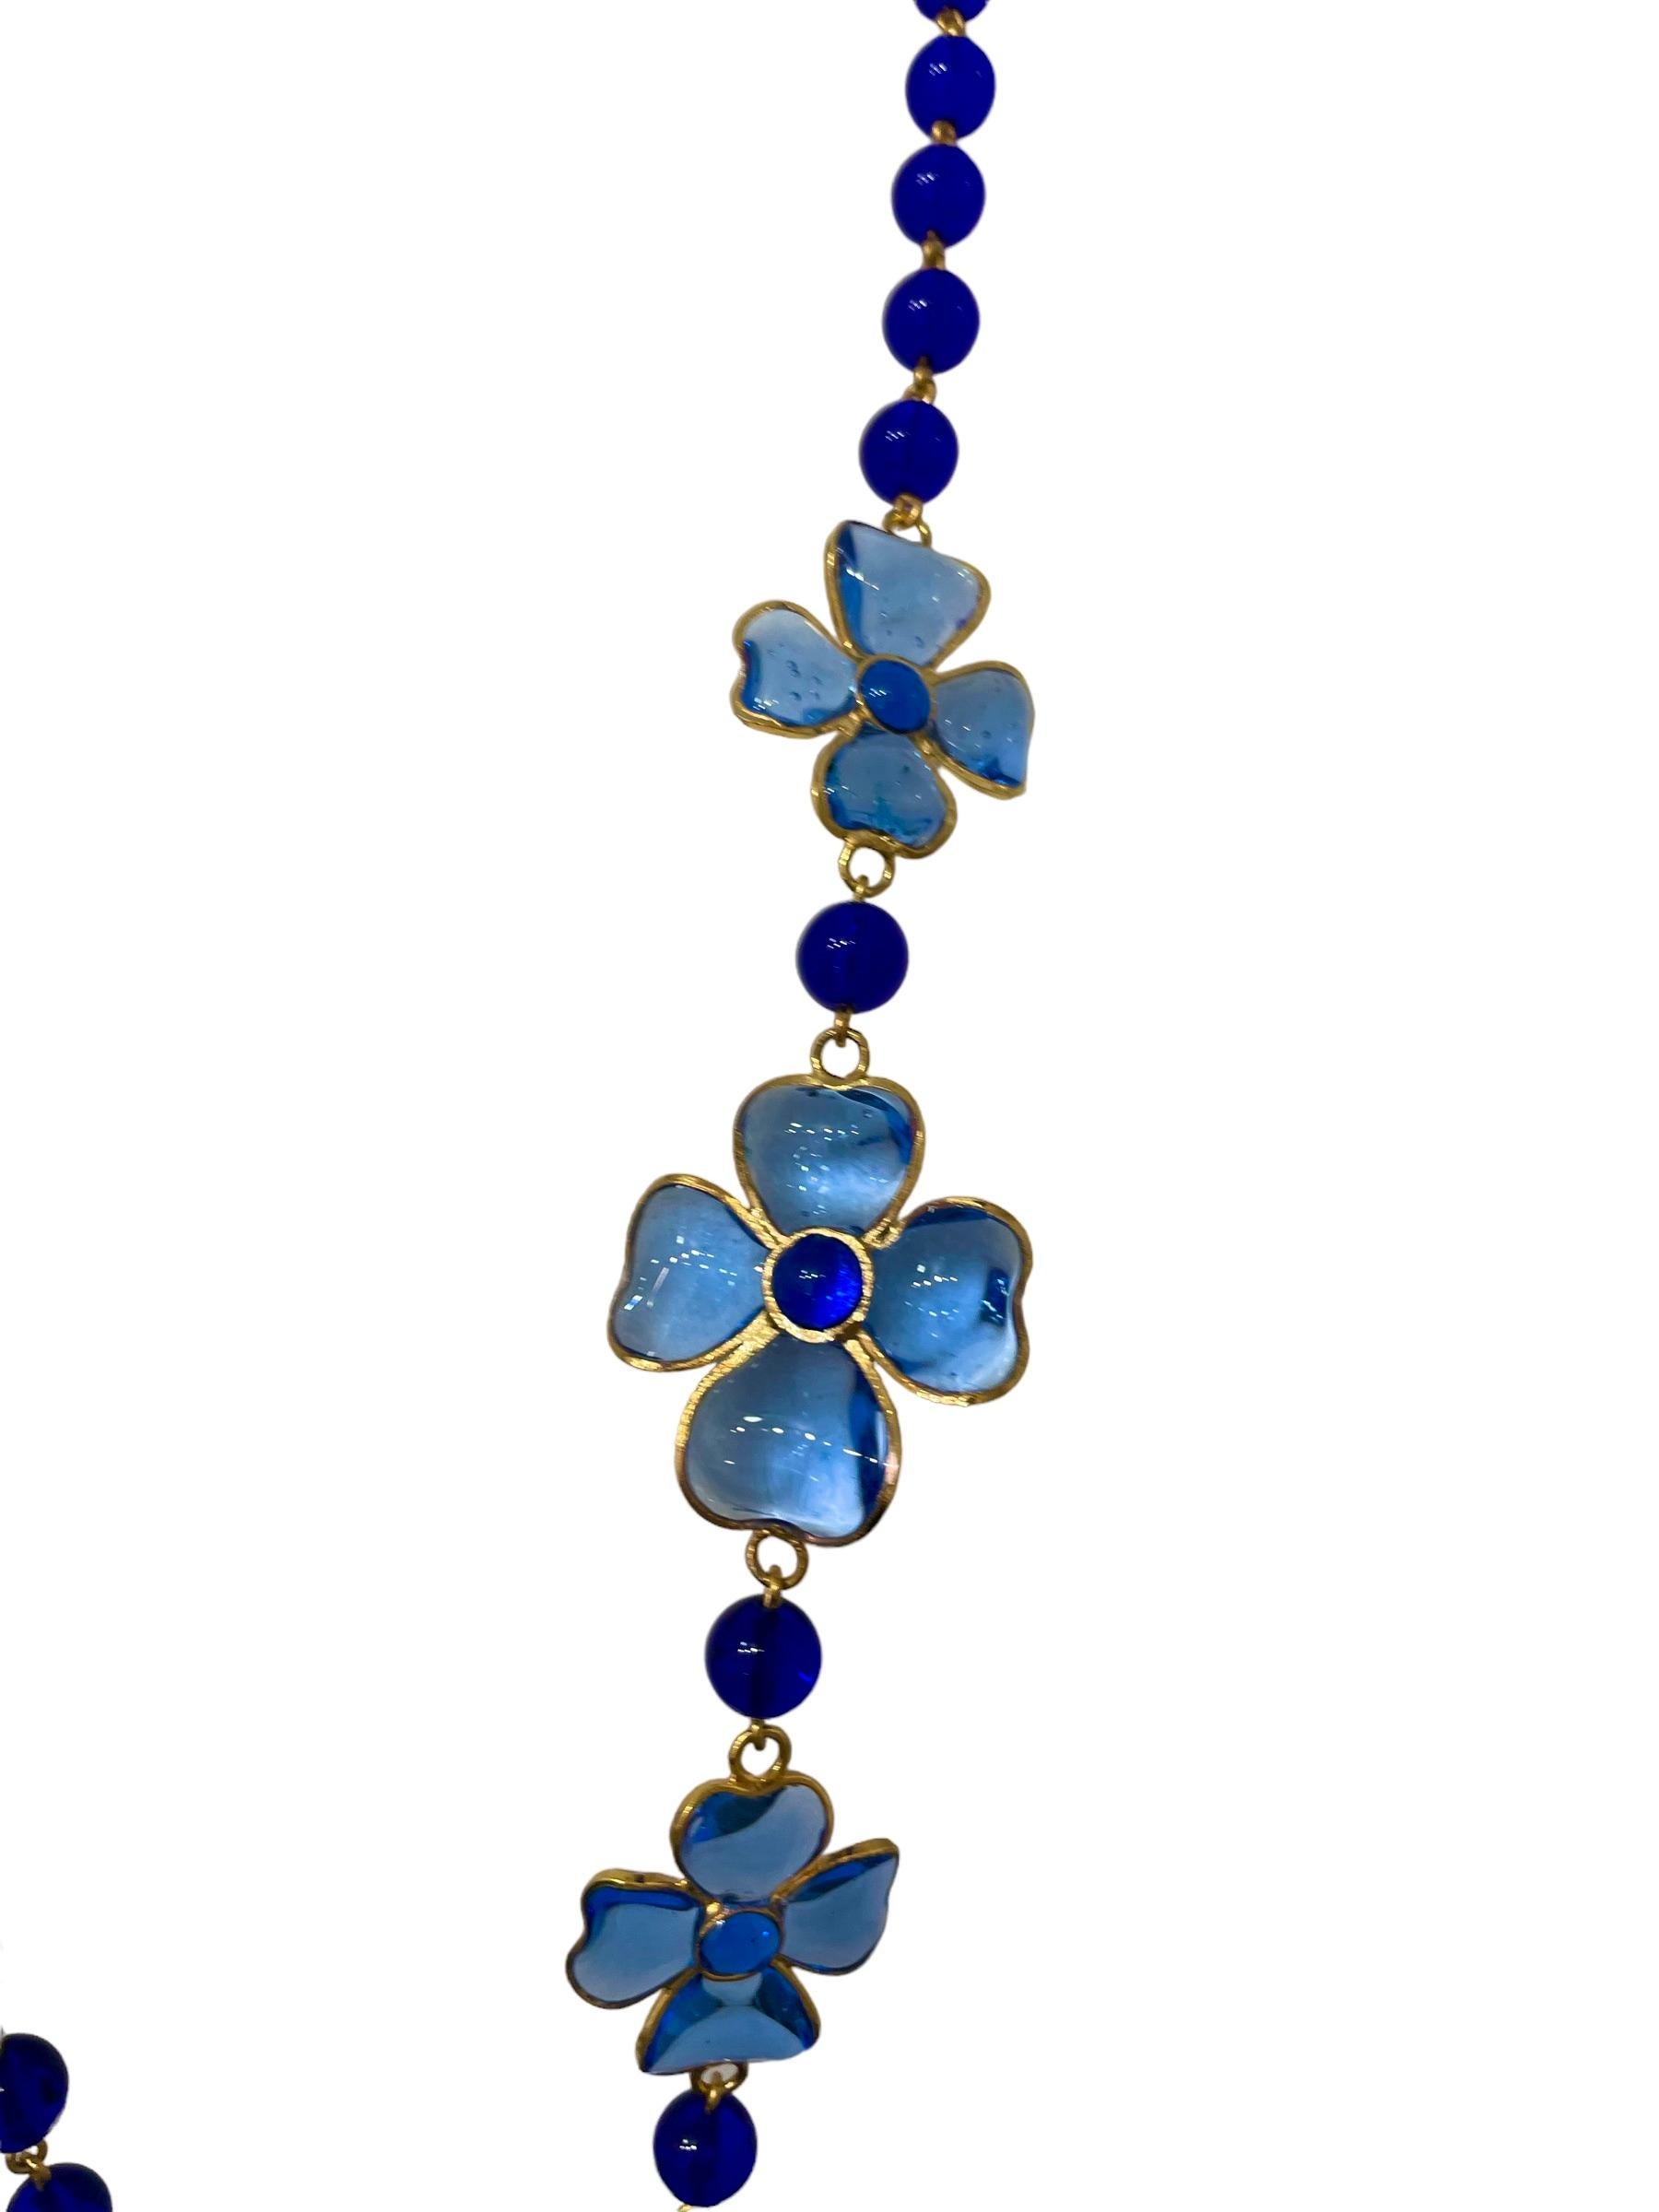 From Francoise Montague collection . Glass beads with pate de verre elements made in the GRIPOIX savoir faire

All Gripoix glass jewelry is made by hand. It was in 1868 when it was first produced, and artisans in France are still making glass